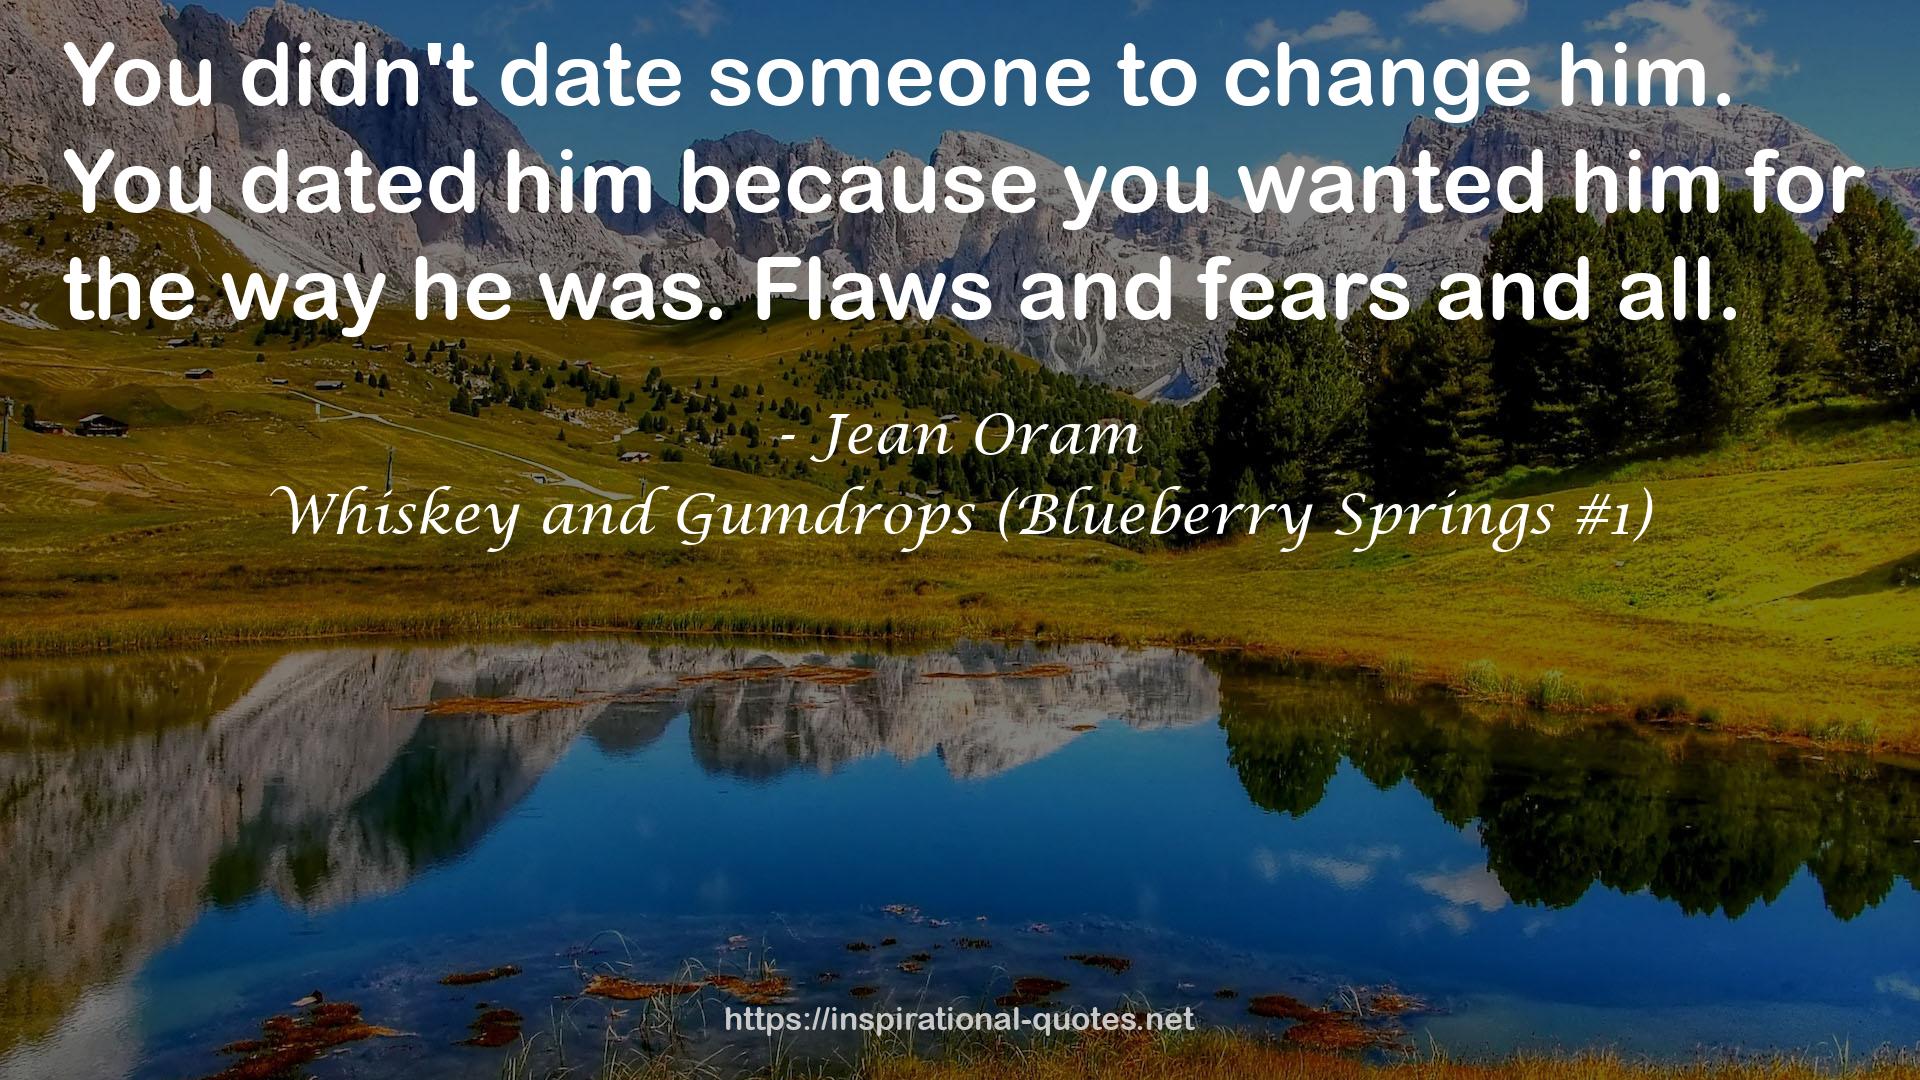 Whiskey and Gumdrops (Blueberry Springs #1) QUOTES